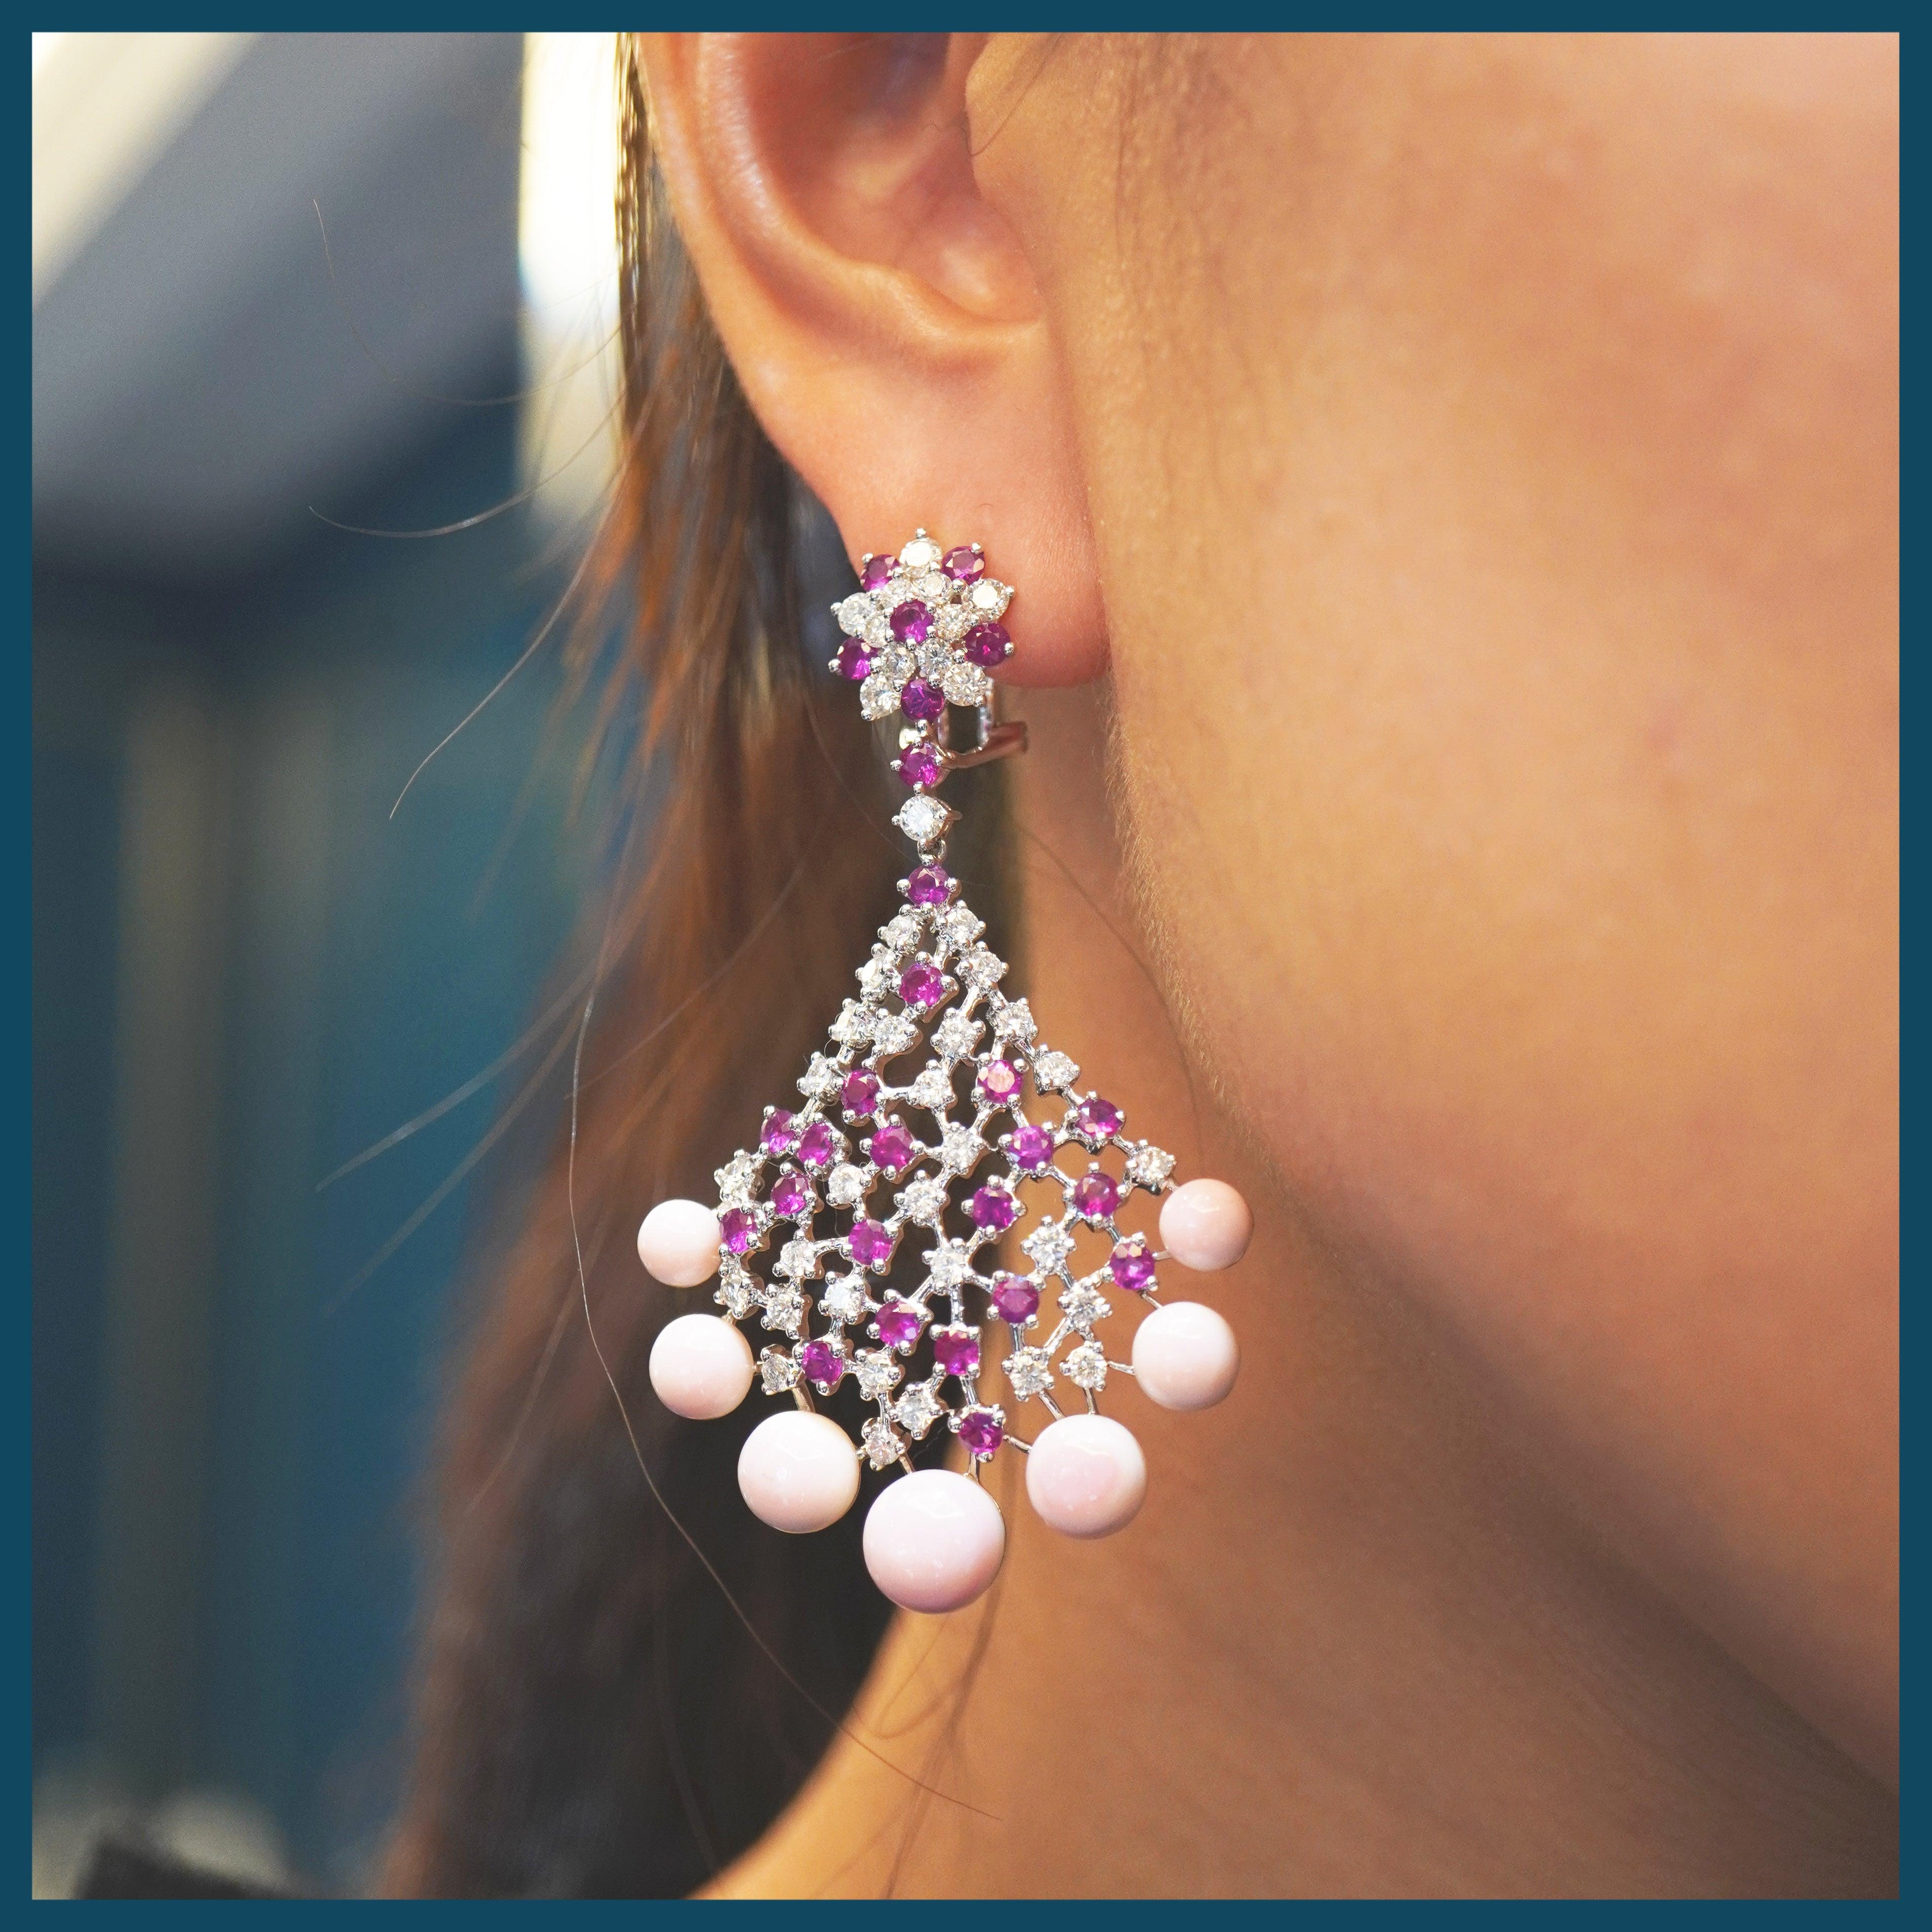 One of our newest innovative collection, 16.80 carat of conch shell are set along with 4.17 carat of vivid red round brilliant ruby from Burma.
The earrings are accented by 3.20 carats of white brilliant round diamond.
The details of the earring are